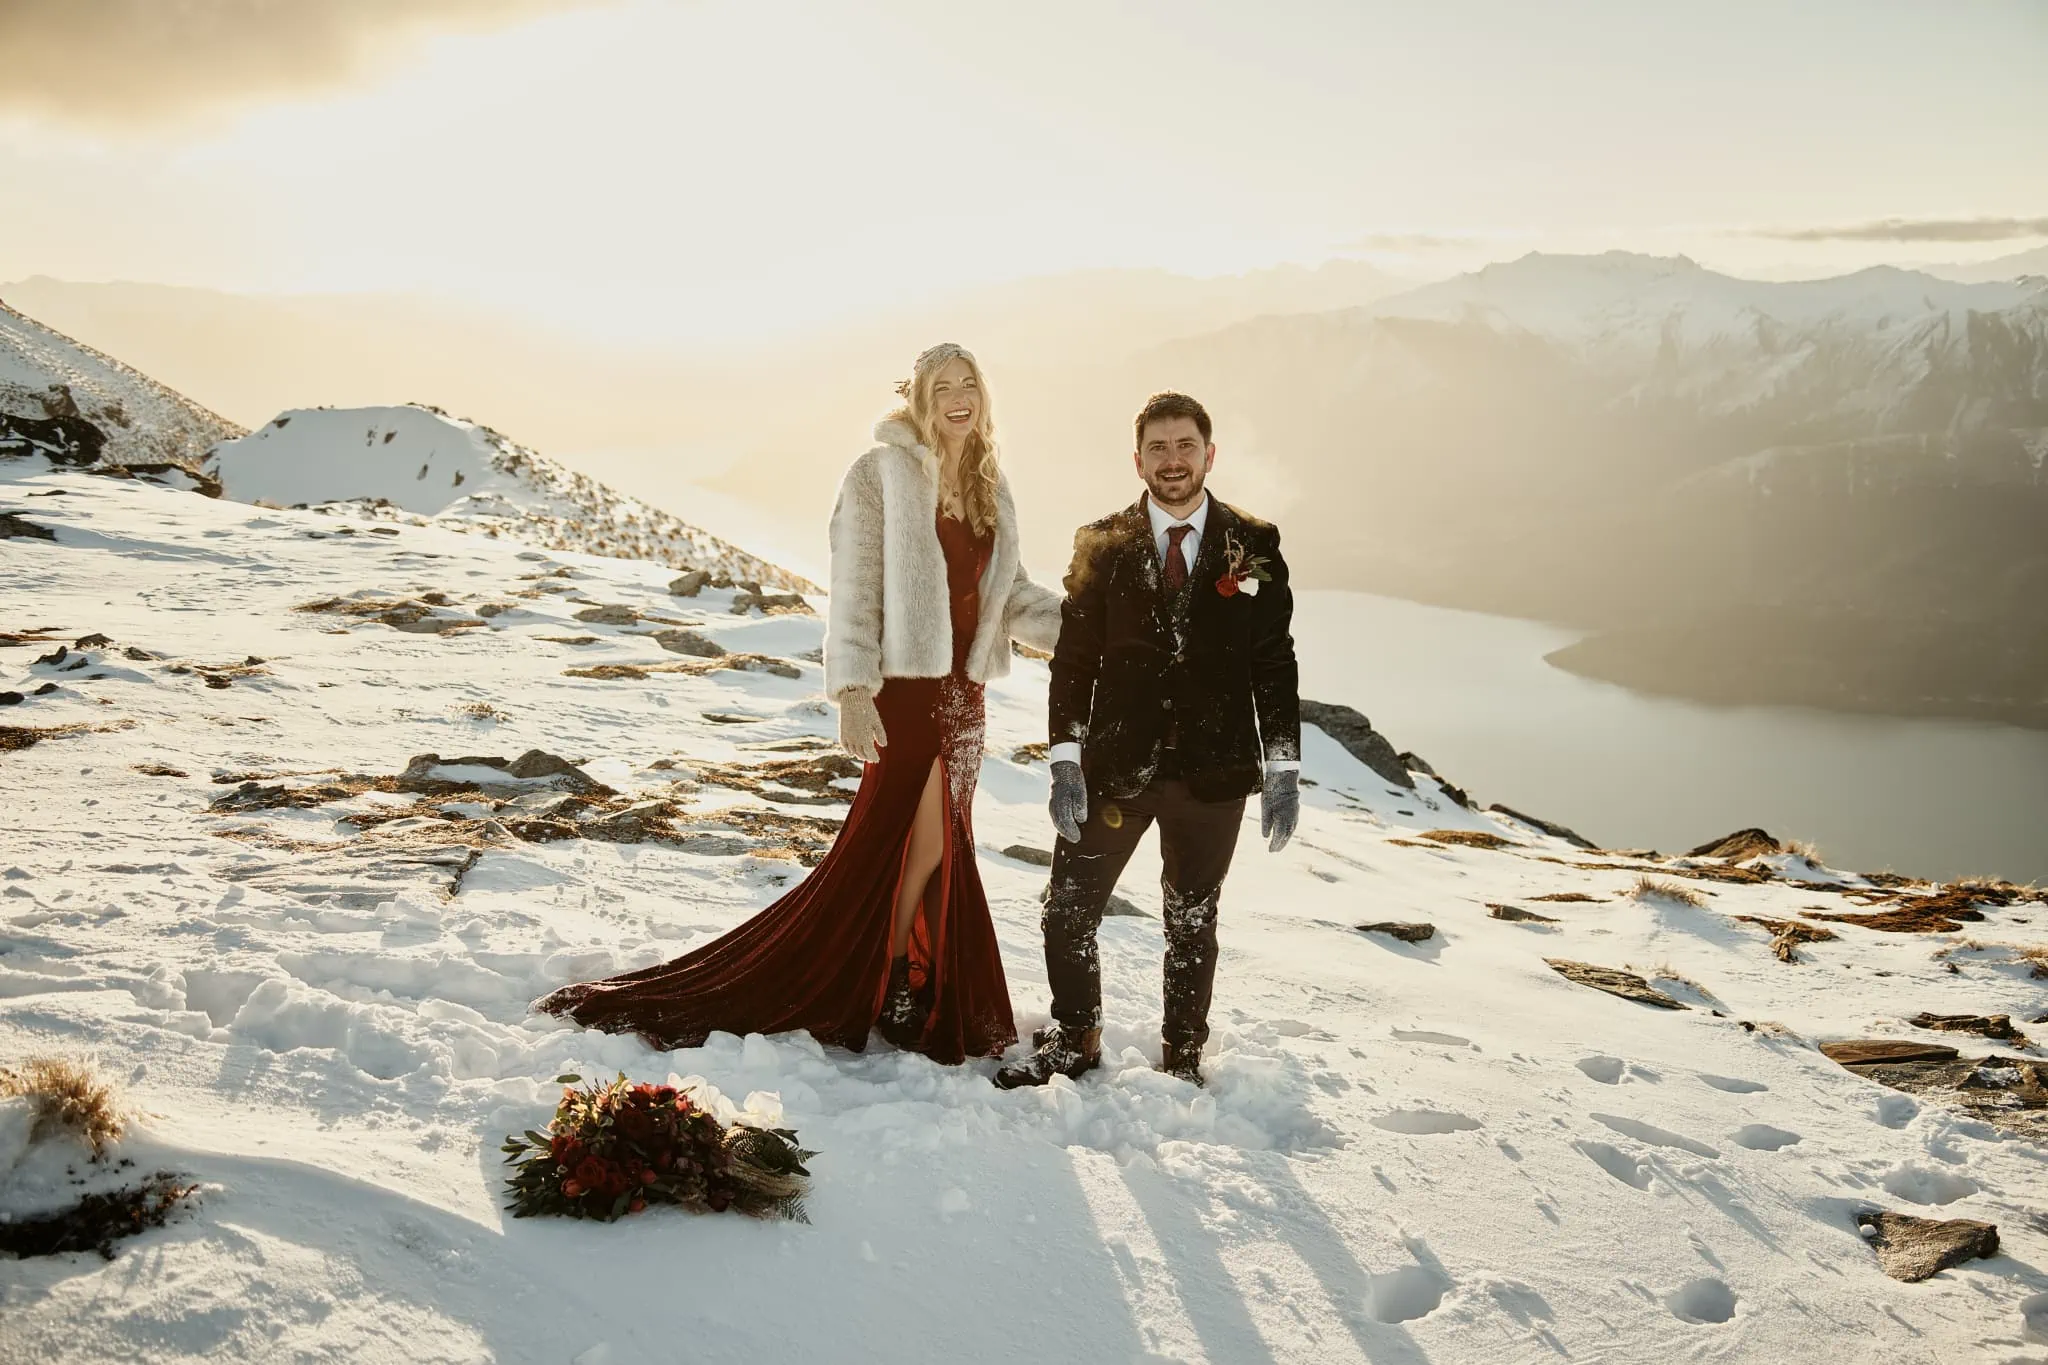 Claire and Rob's Heli Elopement Wedding on Cecil Peak brings them together on a snow covered mountain.